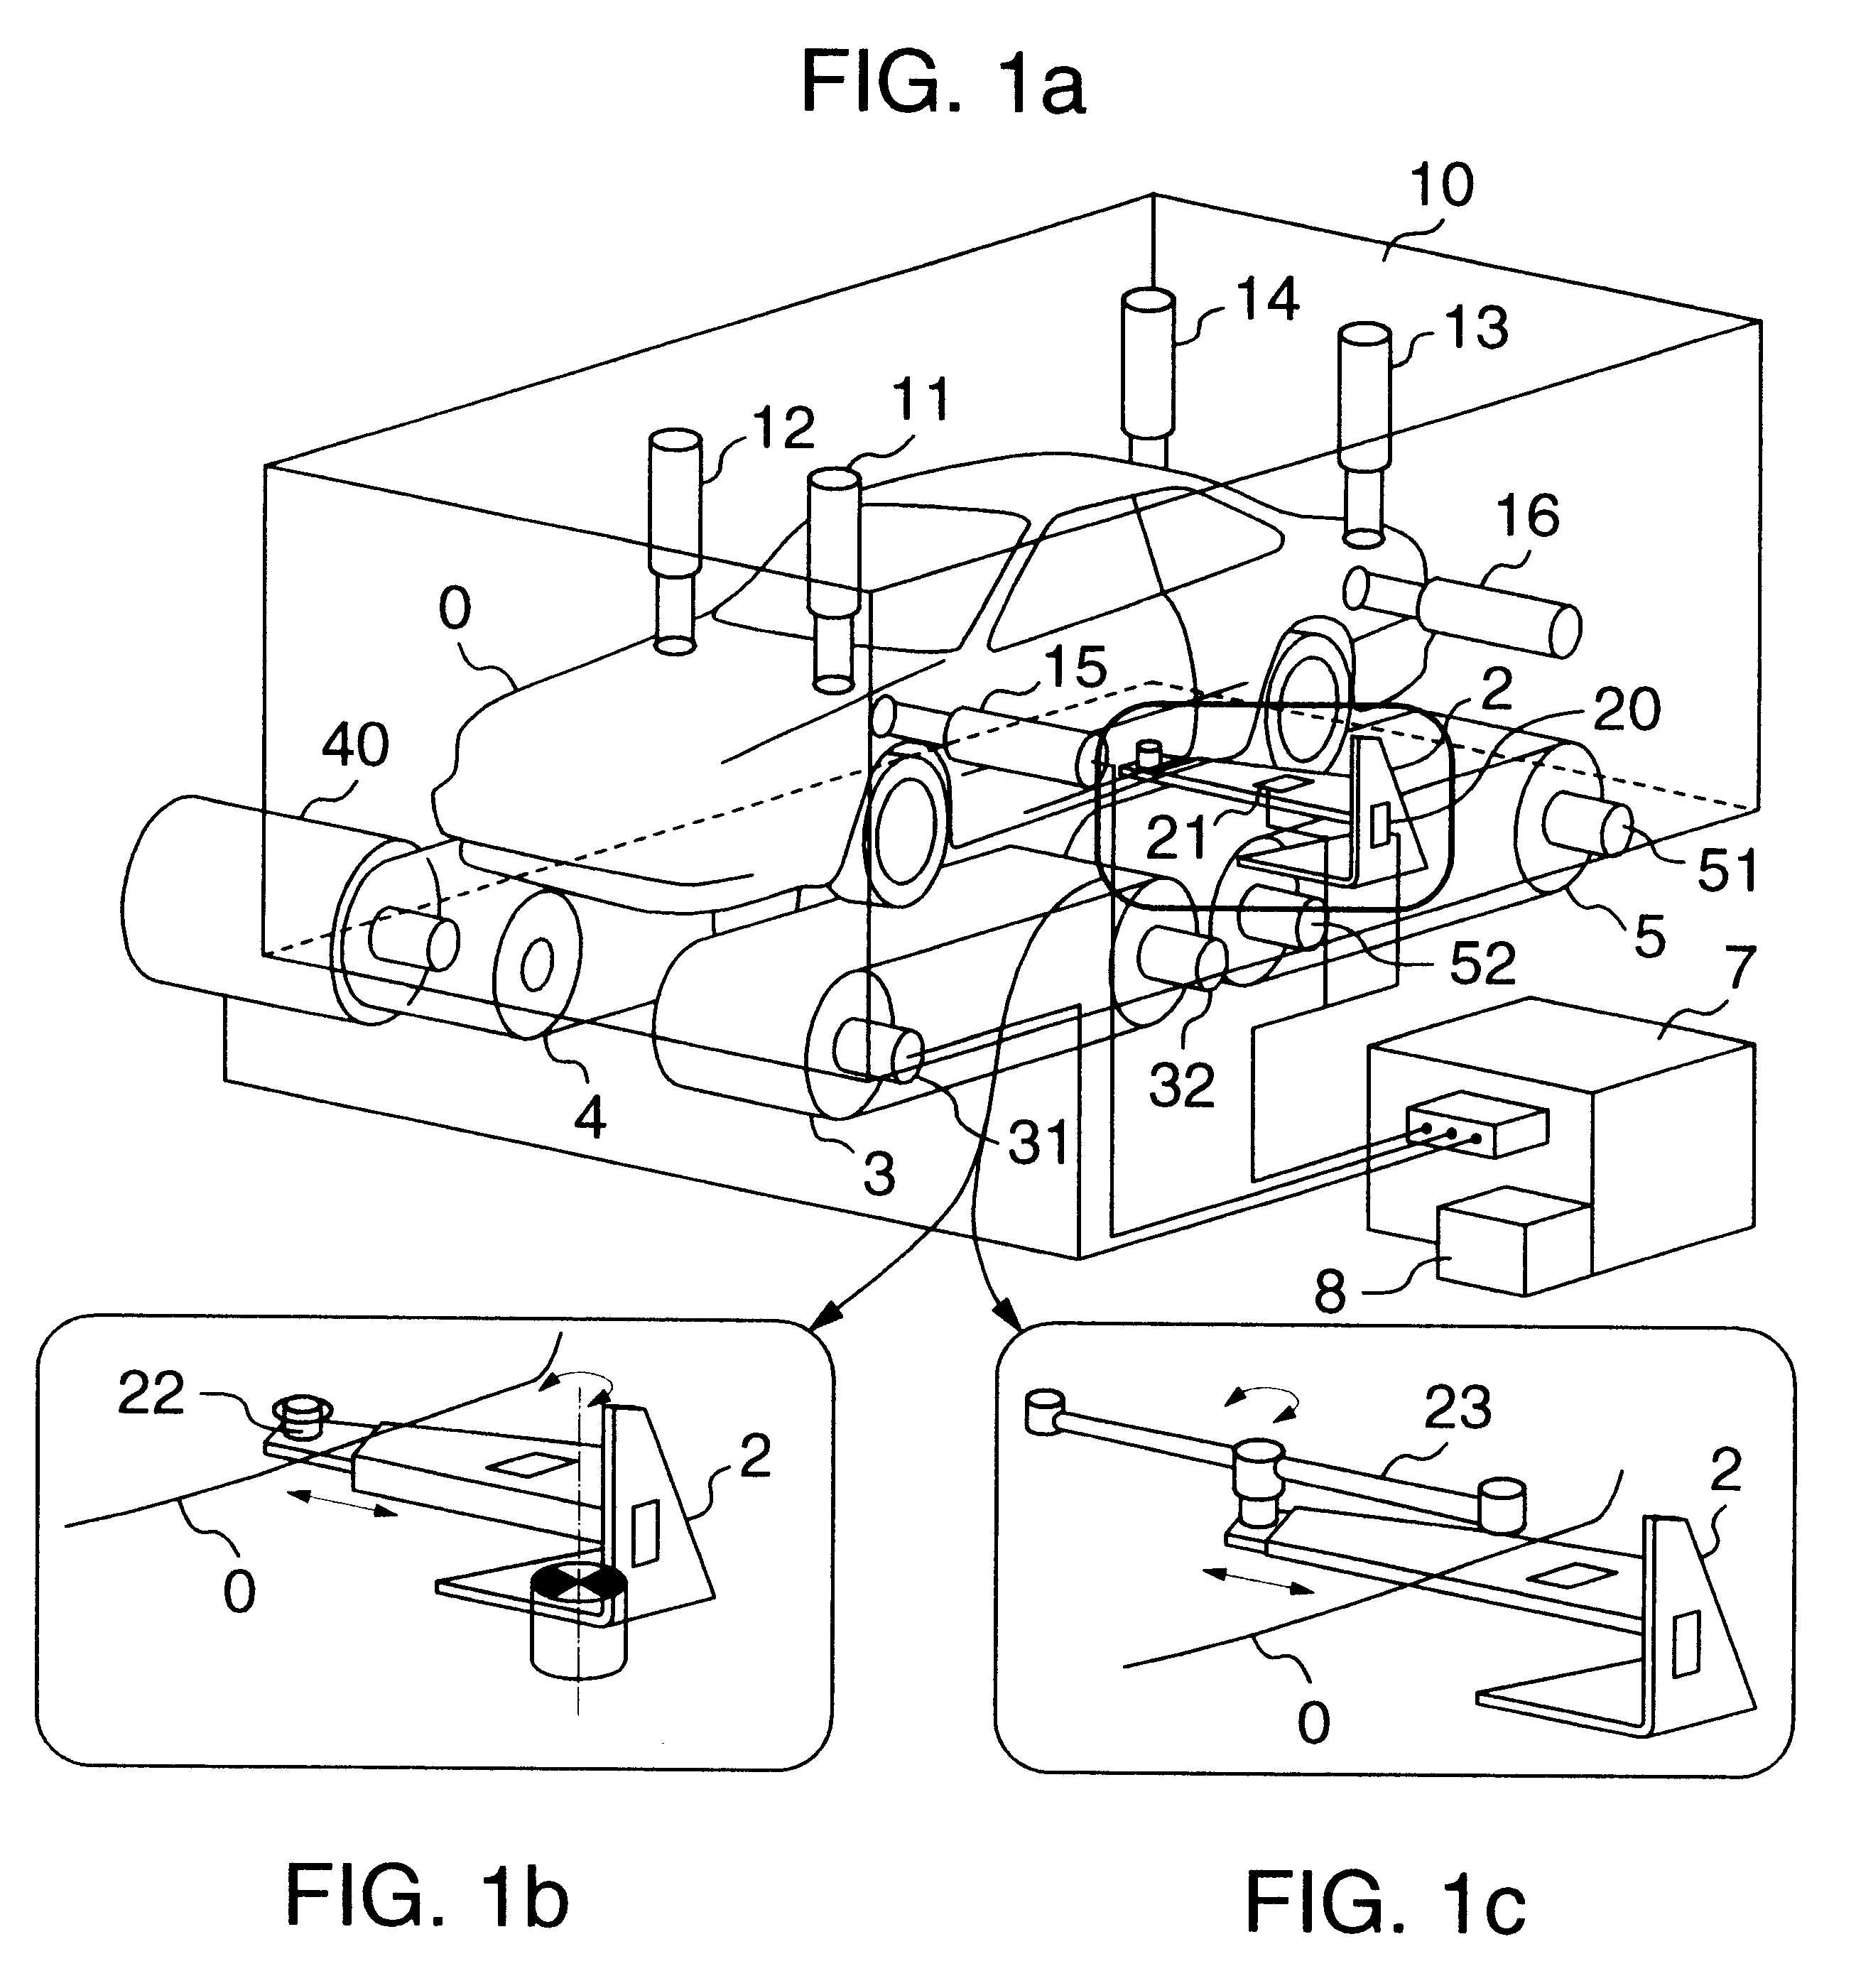 Apparatus for the method of testing vehicle